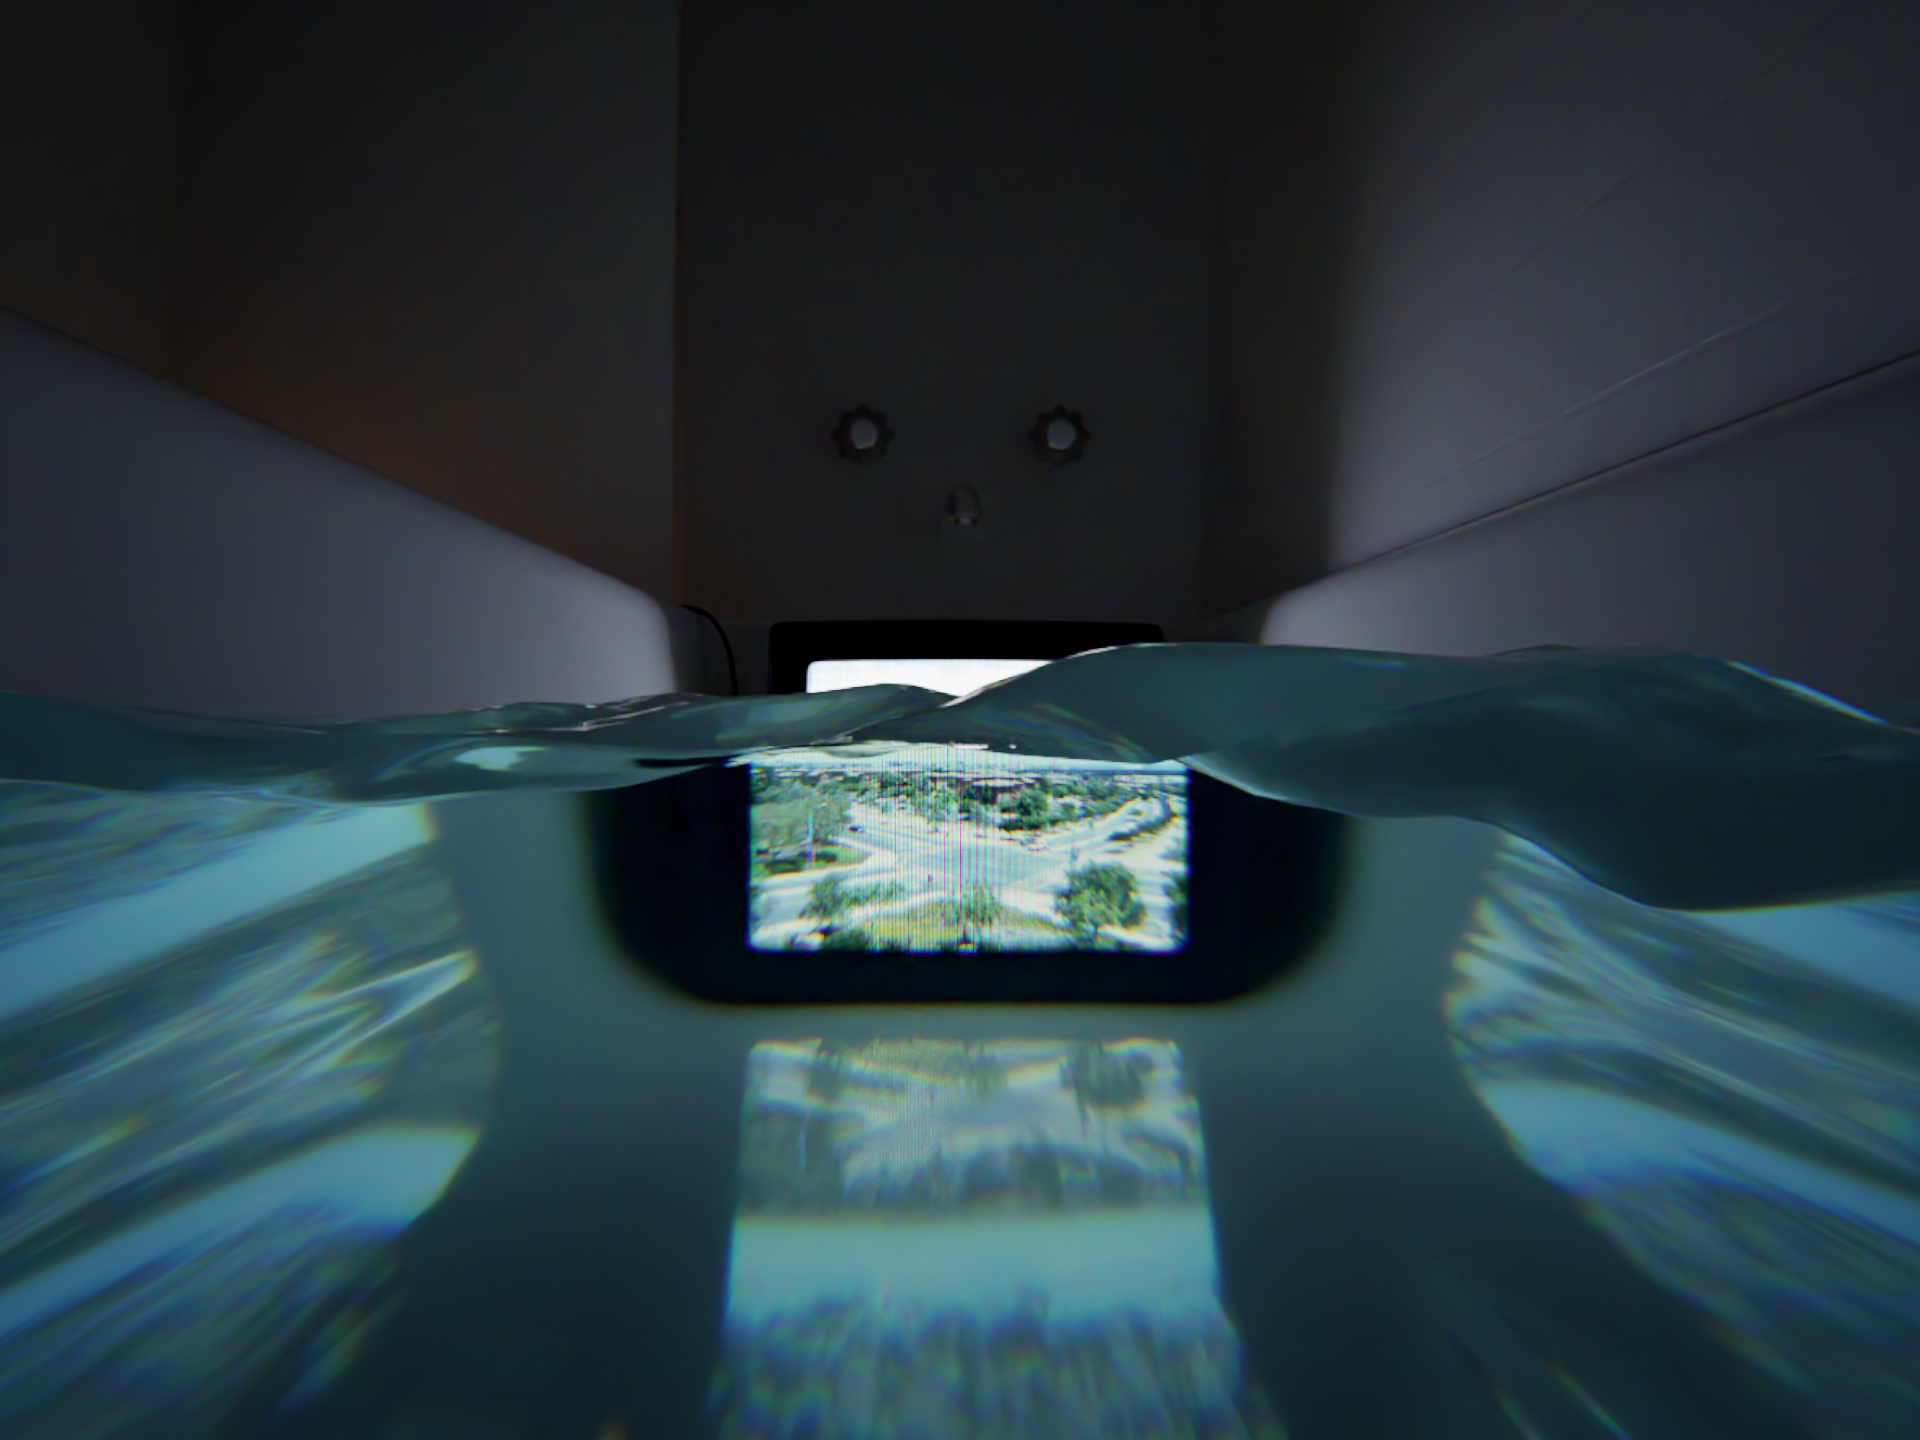 Rendering of a CRT TV in a bath tub as viewed from underwater